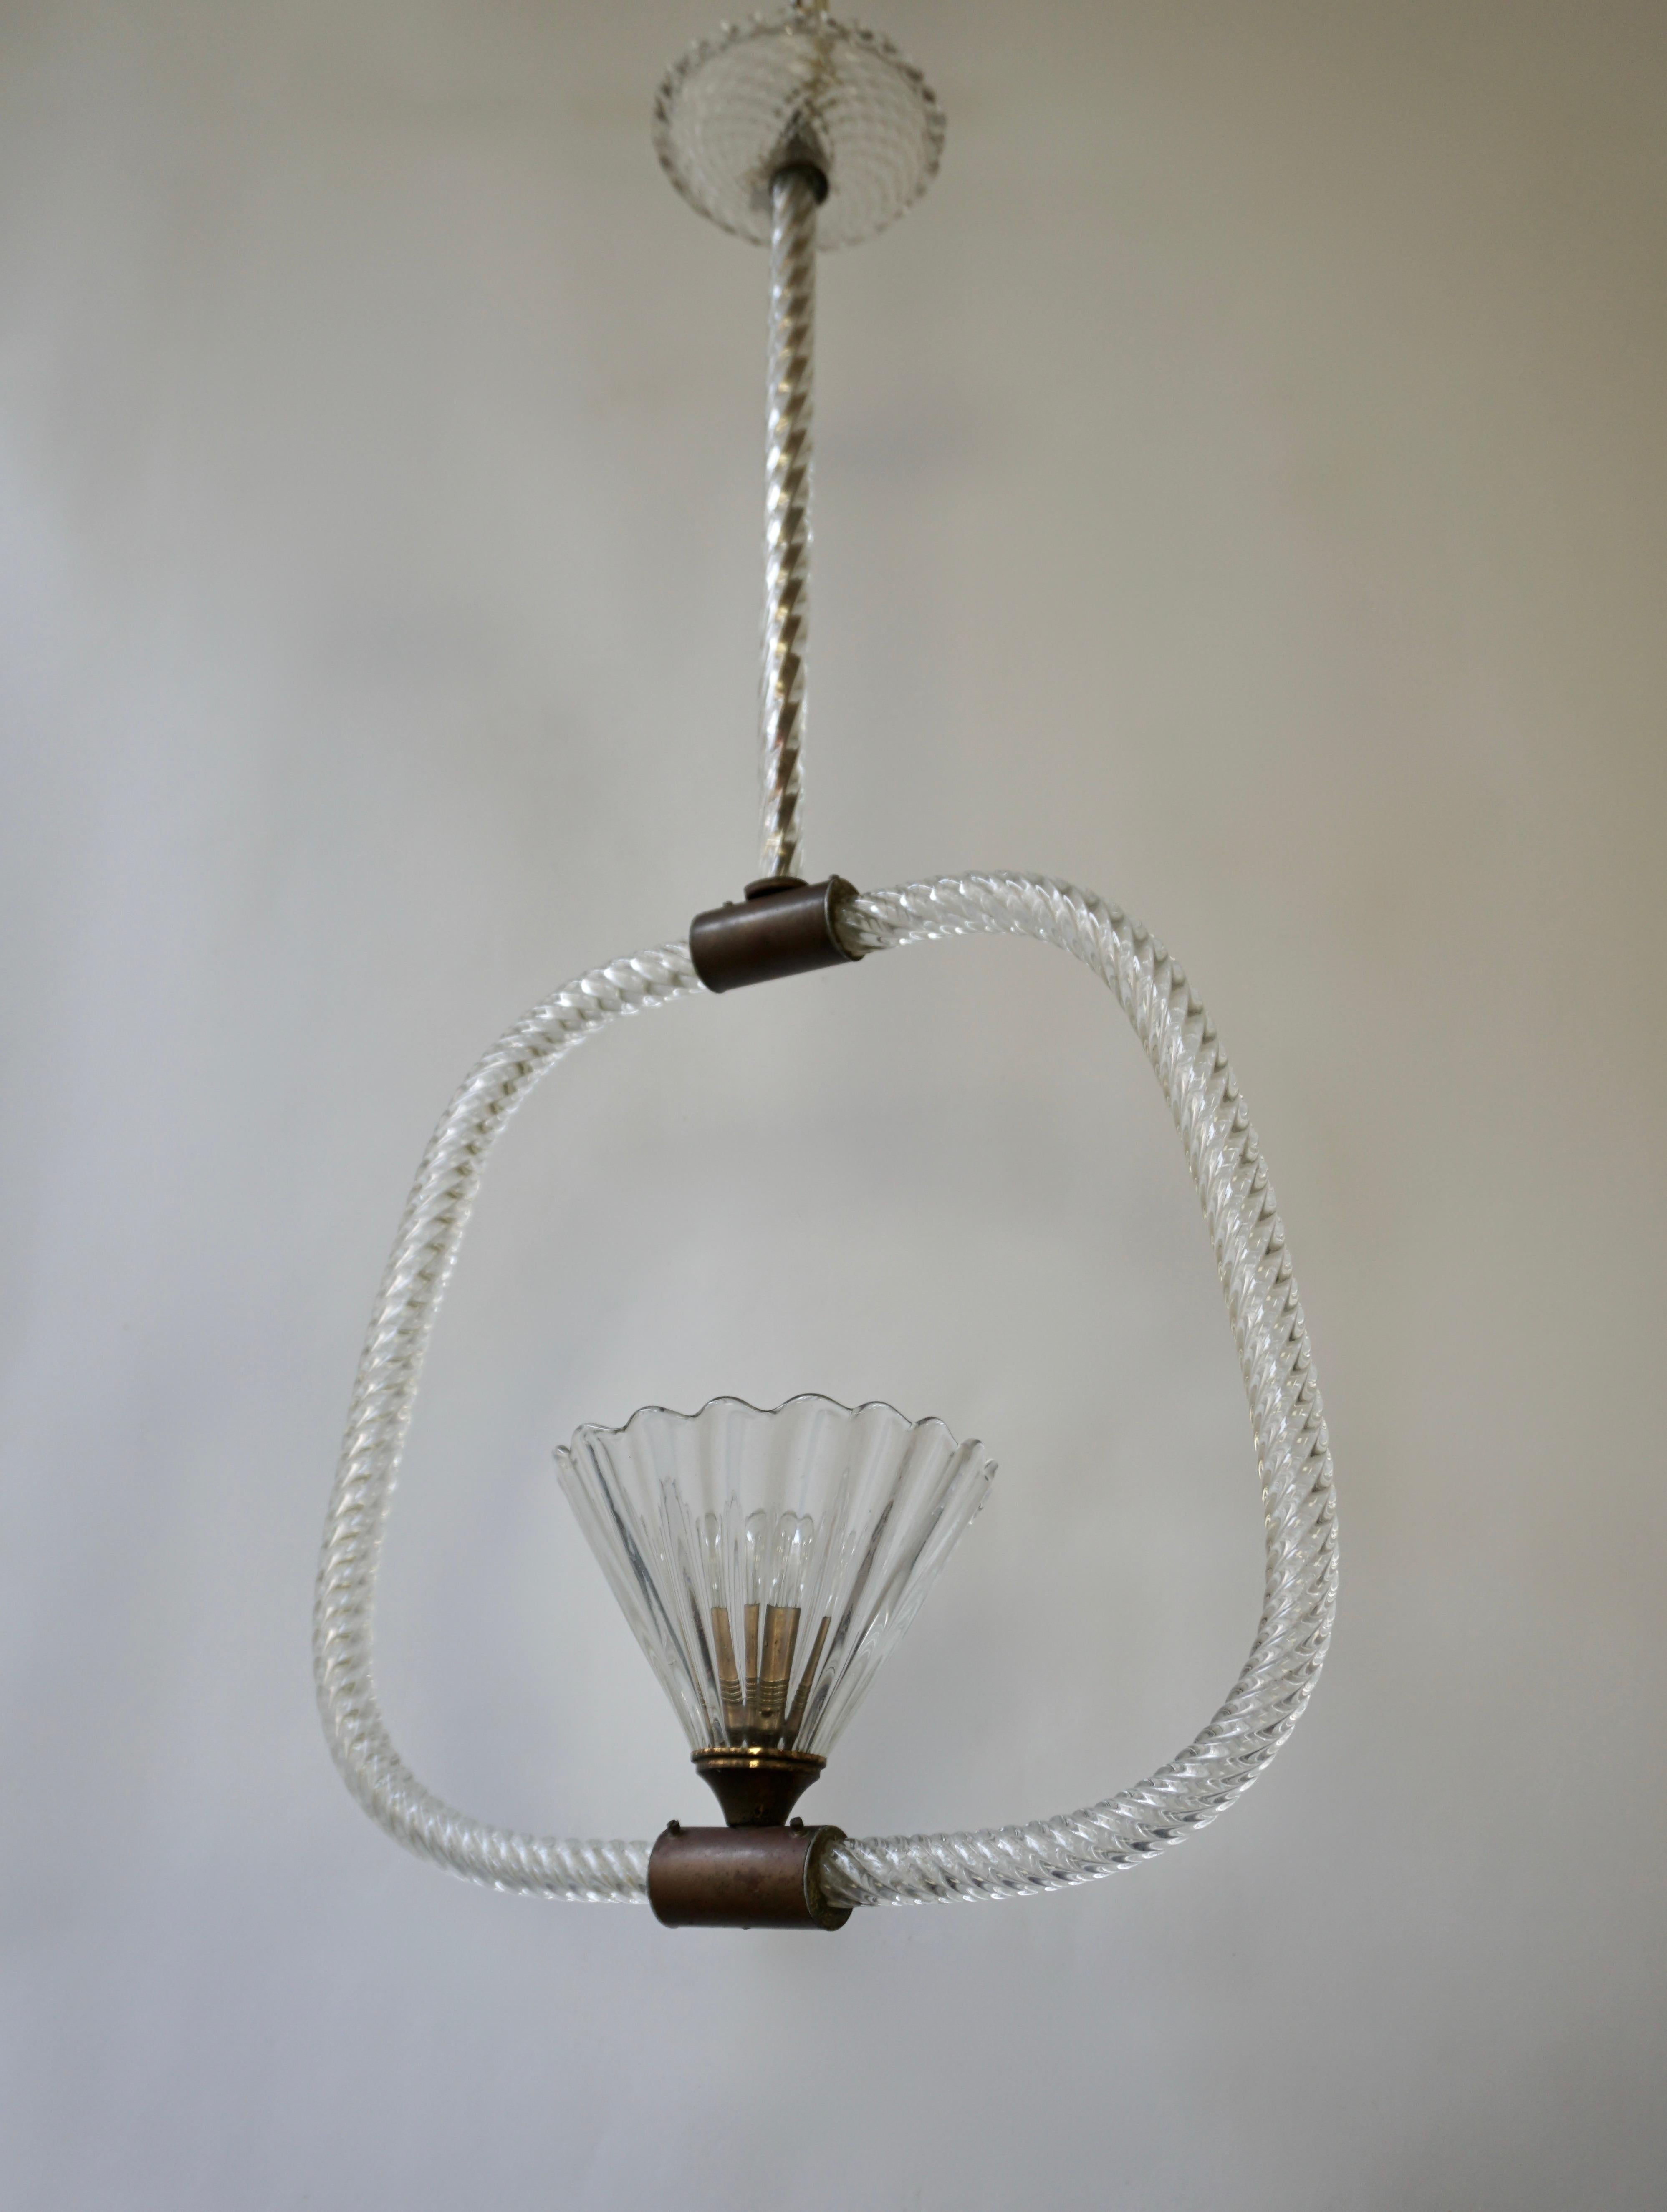 A glass semi-flush mounted pendant with a rope-twist detailed hoop-form body and stem with the central element and canopy having hatch-marked textures and scalloped edges. The brass fittings in their original aged finish. By the Italian maker